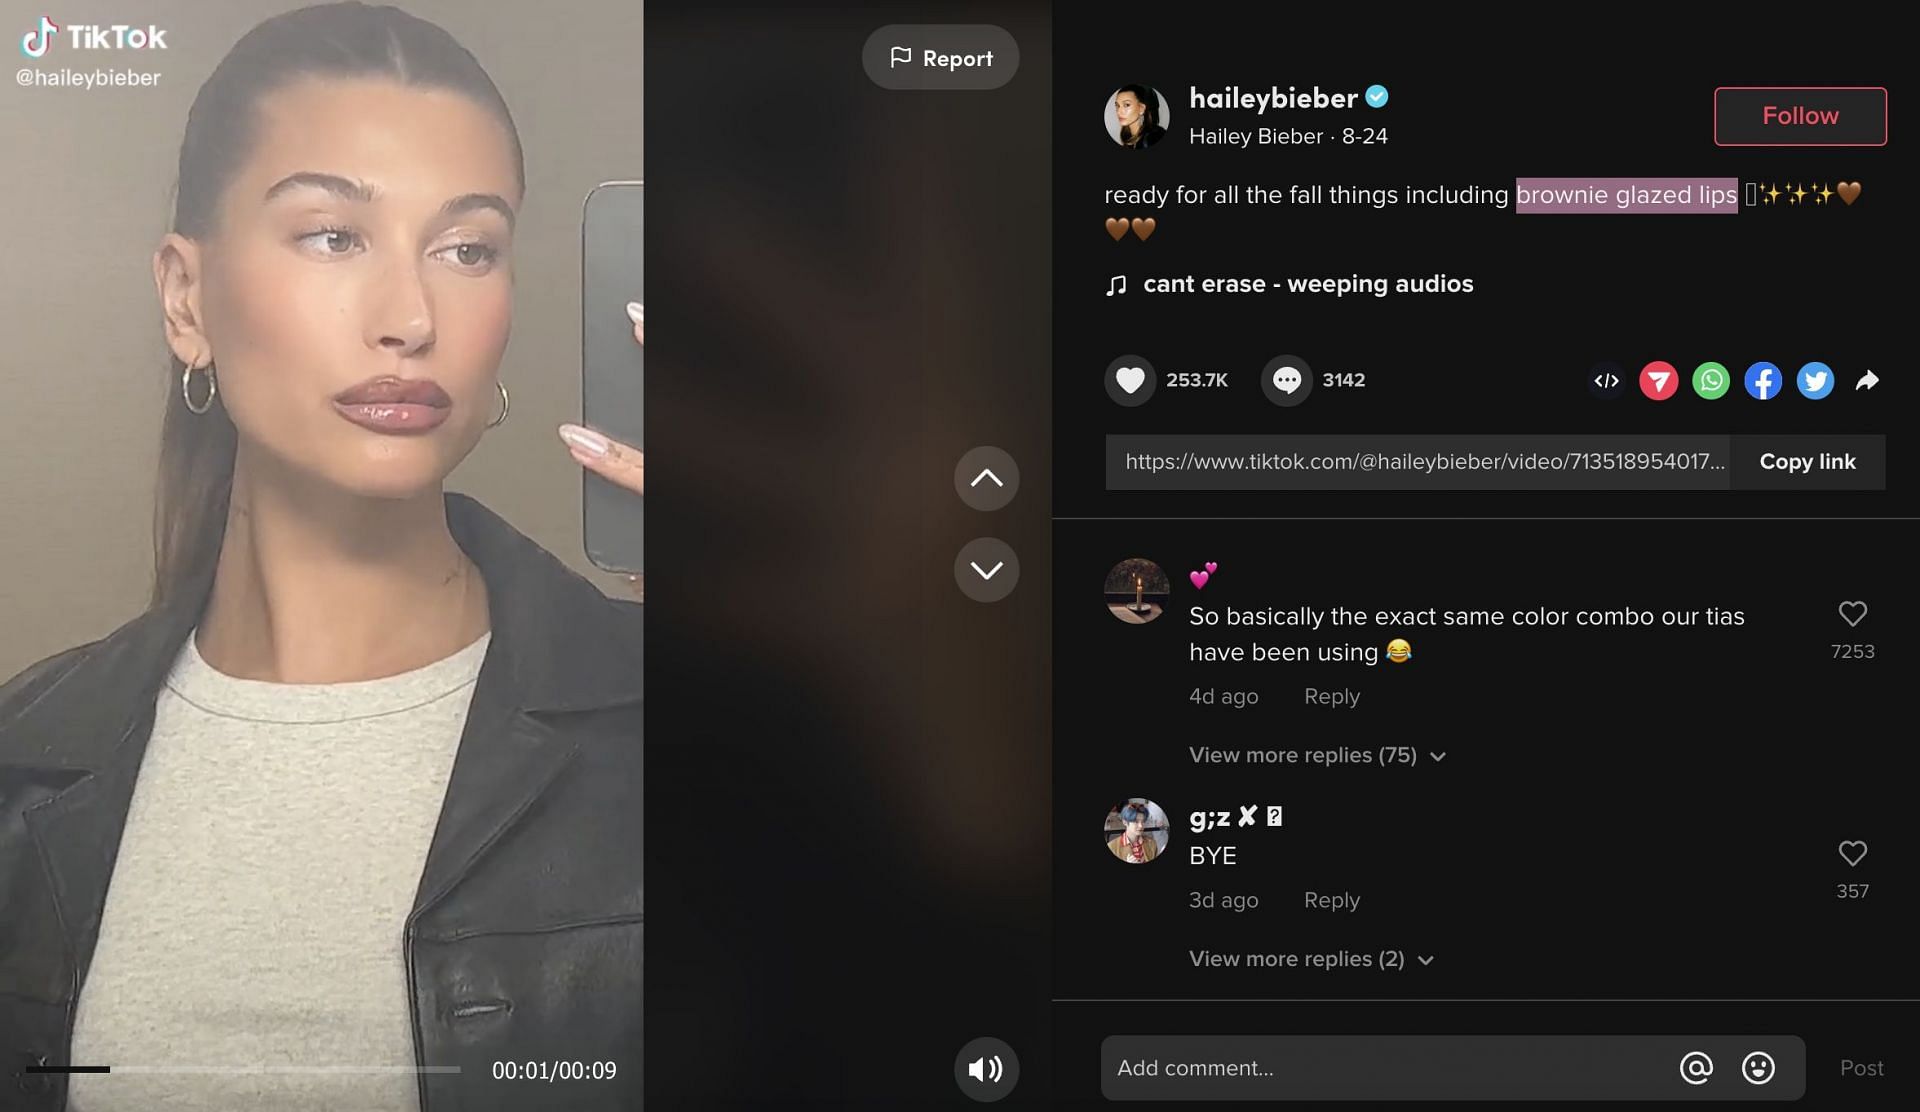 Hailey Bieber again goes for the &#039;brownie glazed lips&#039; in the caption of a new video. (Image via TikTok)